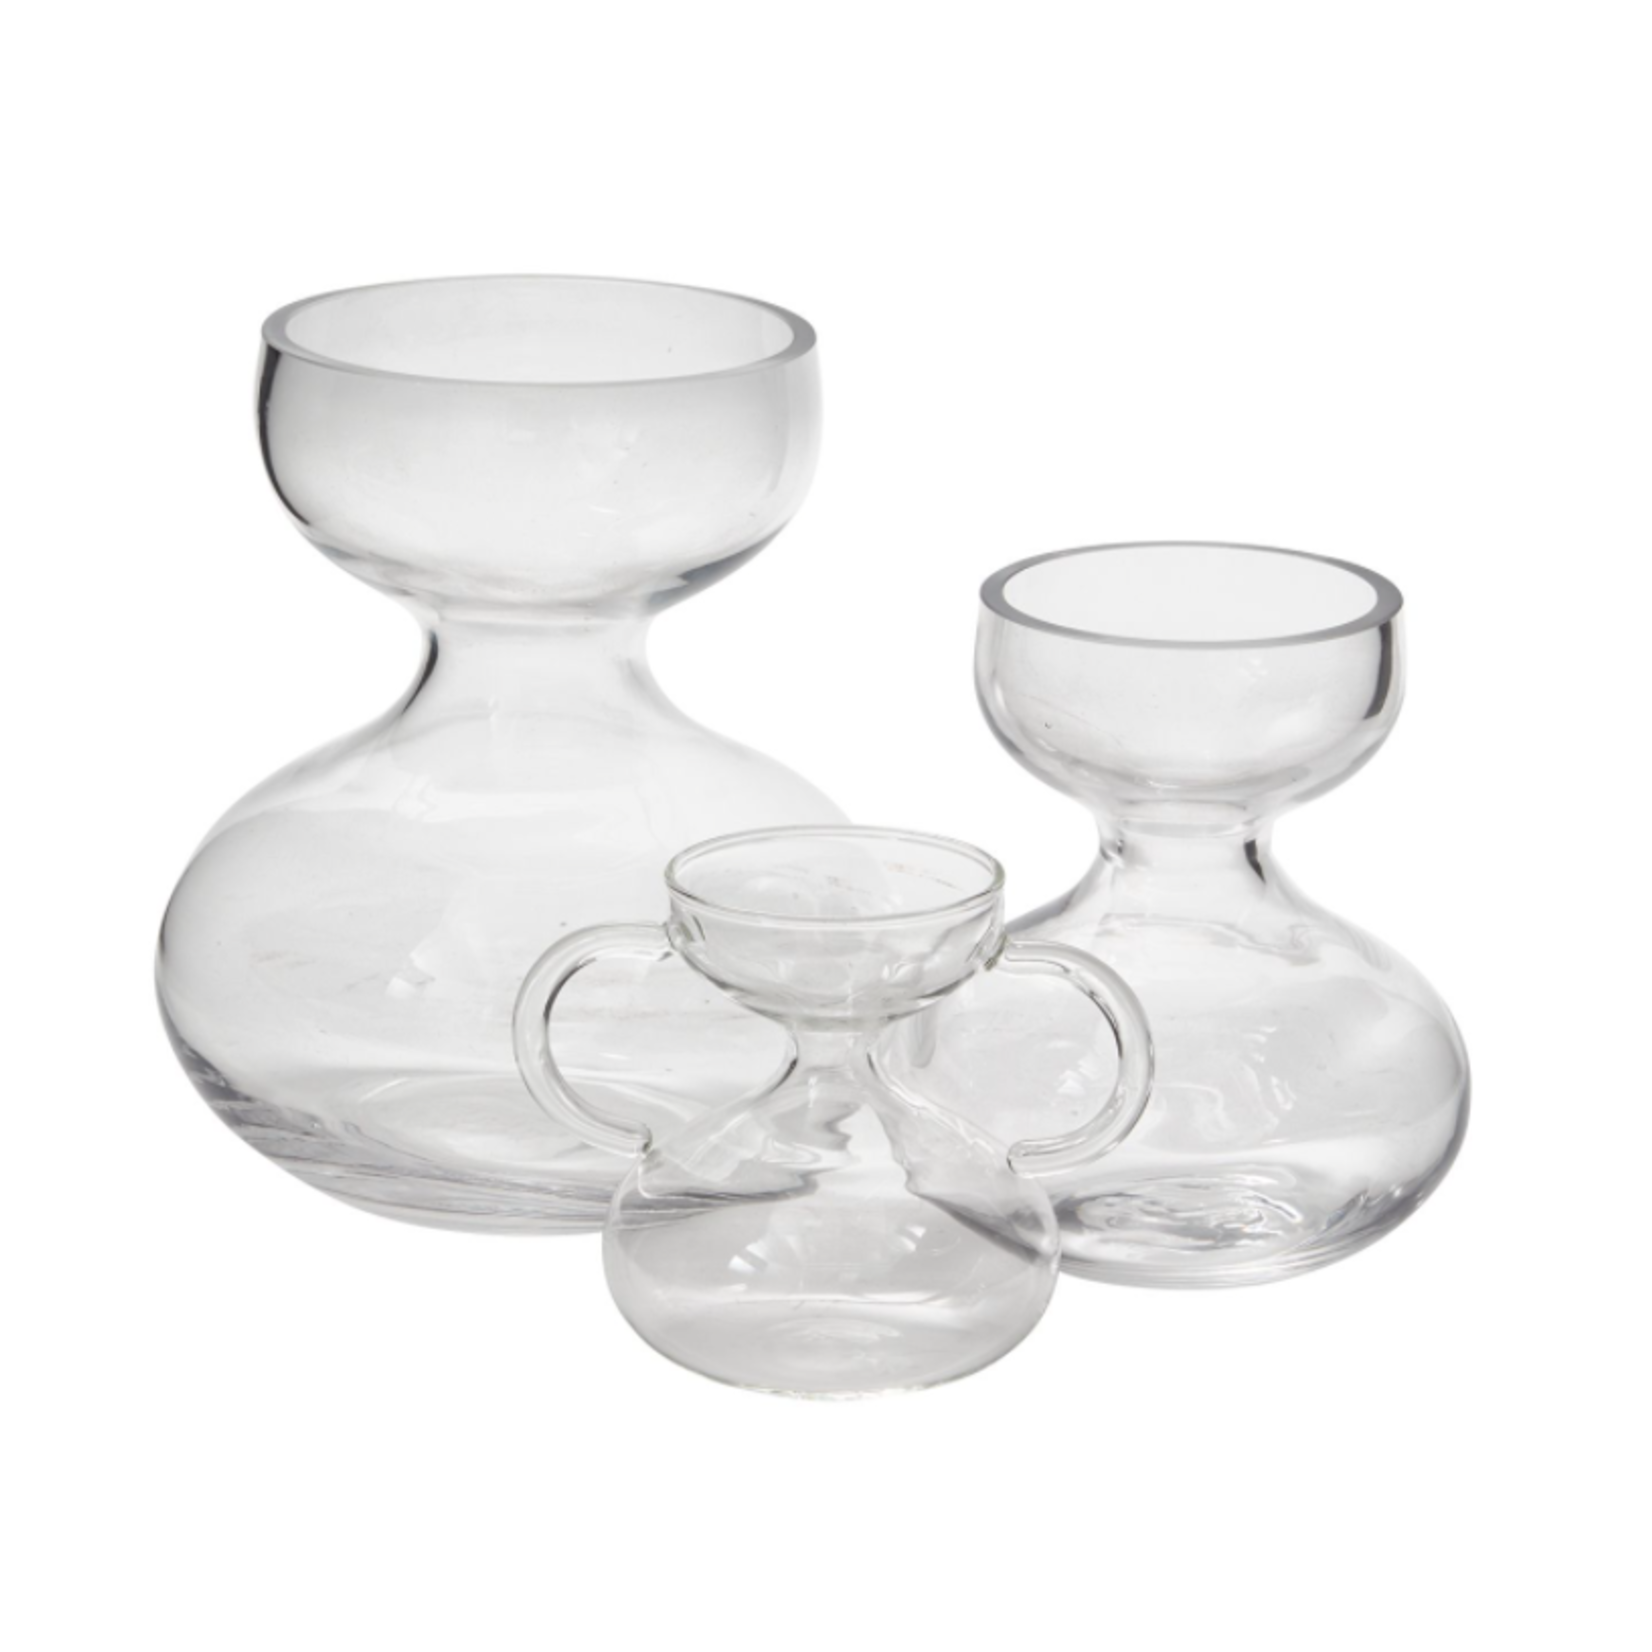 50% off was $11 now $5.50, 4.5”X 5.75” ASHBY HOUR GLASS WITH HANDLES BUDVASE